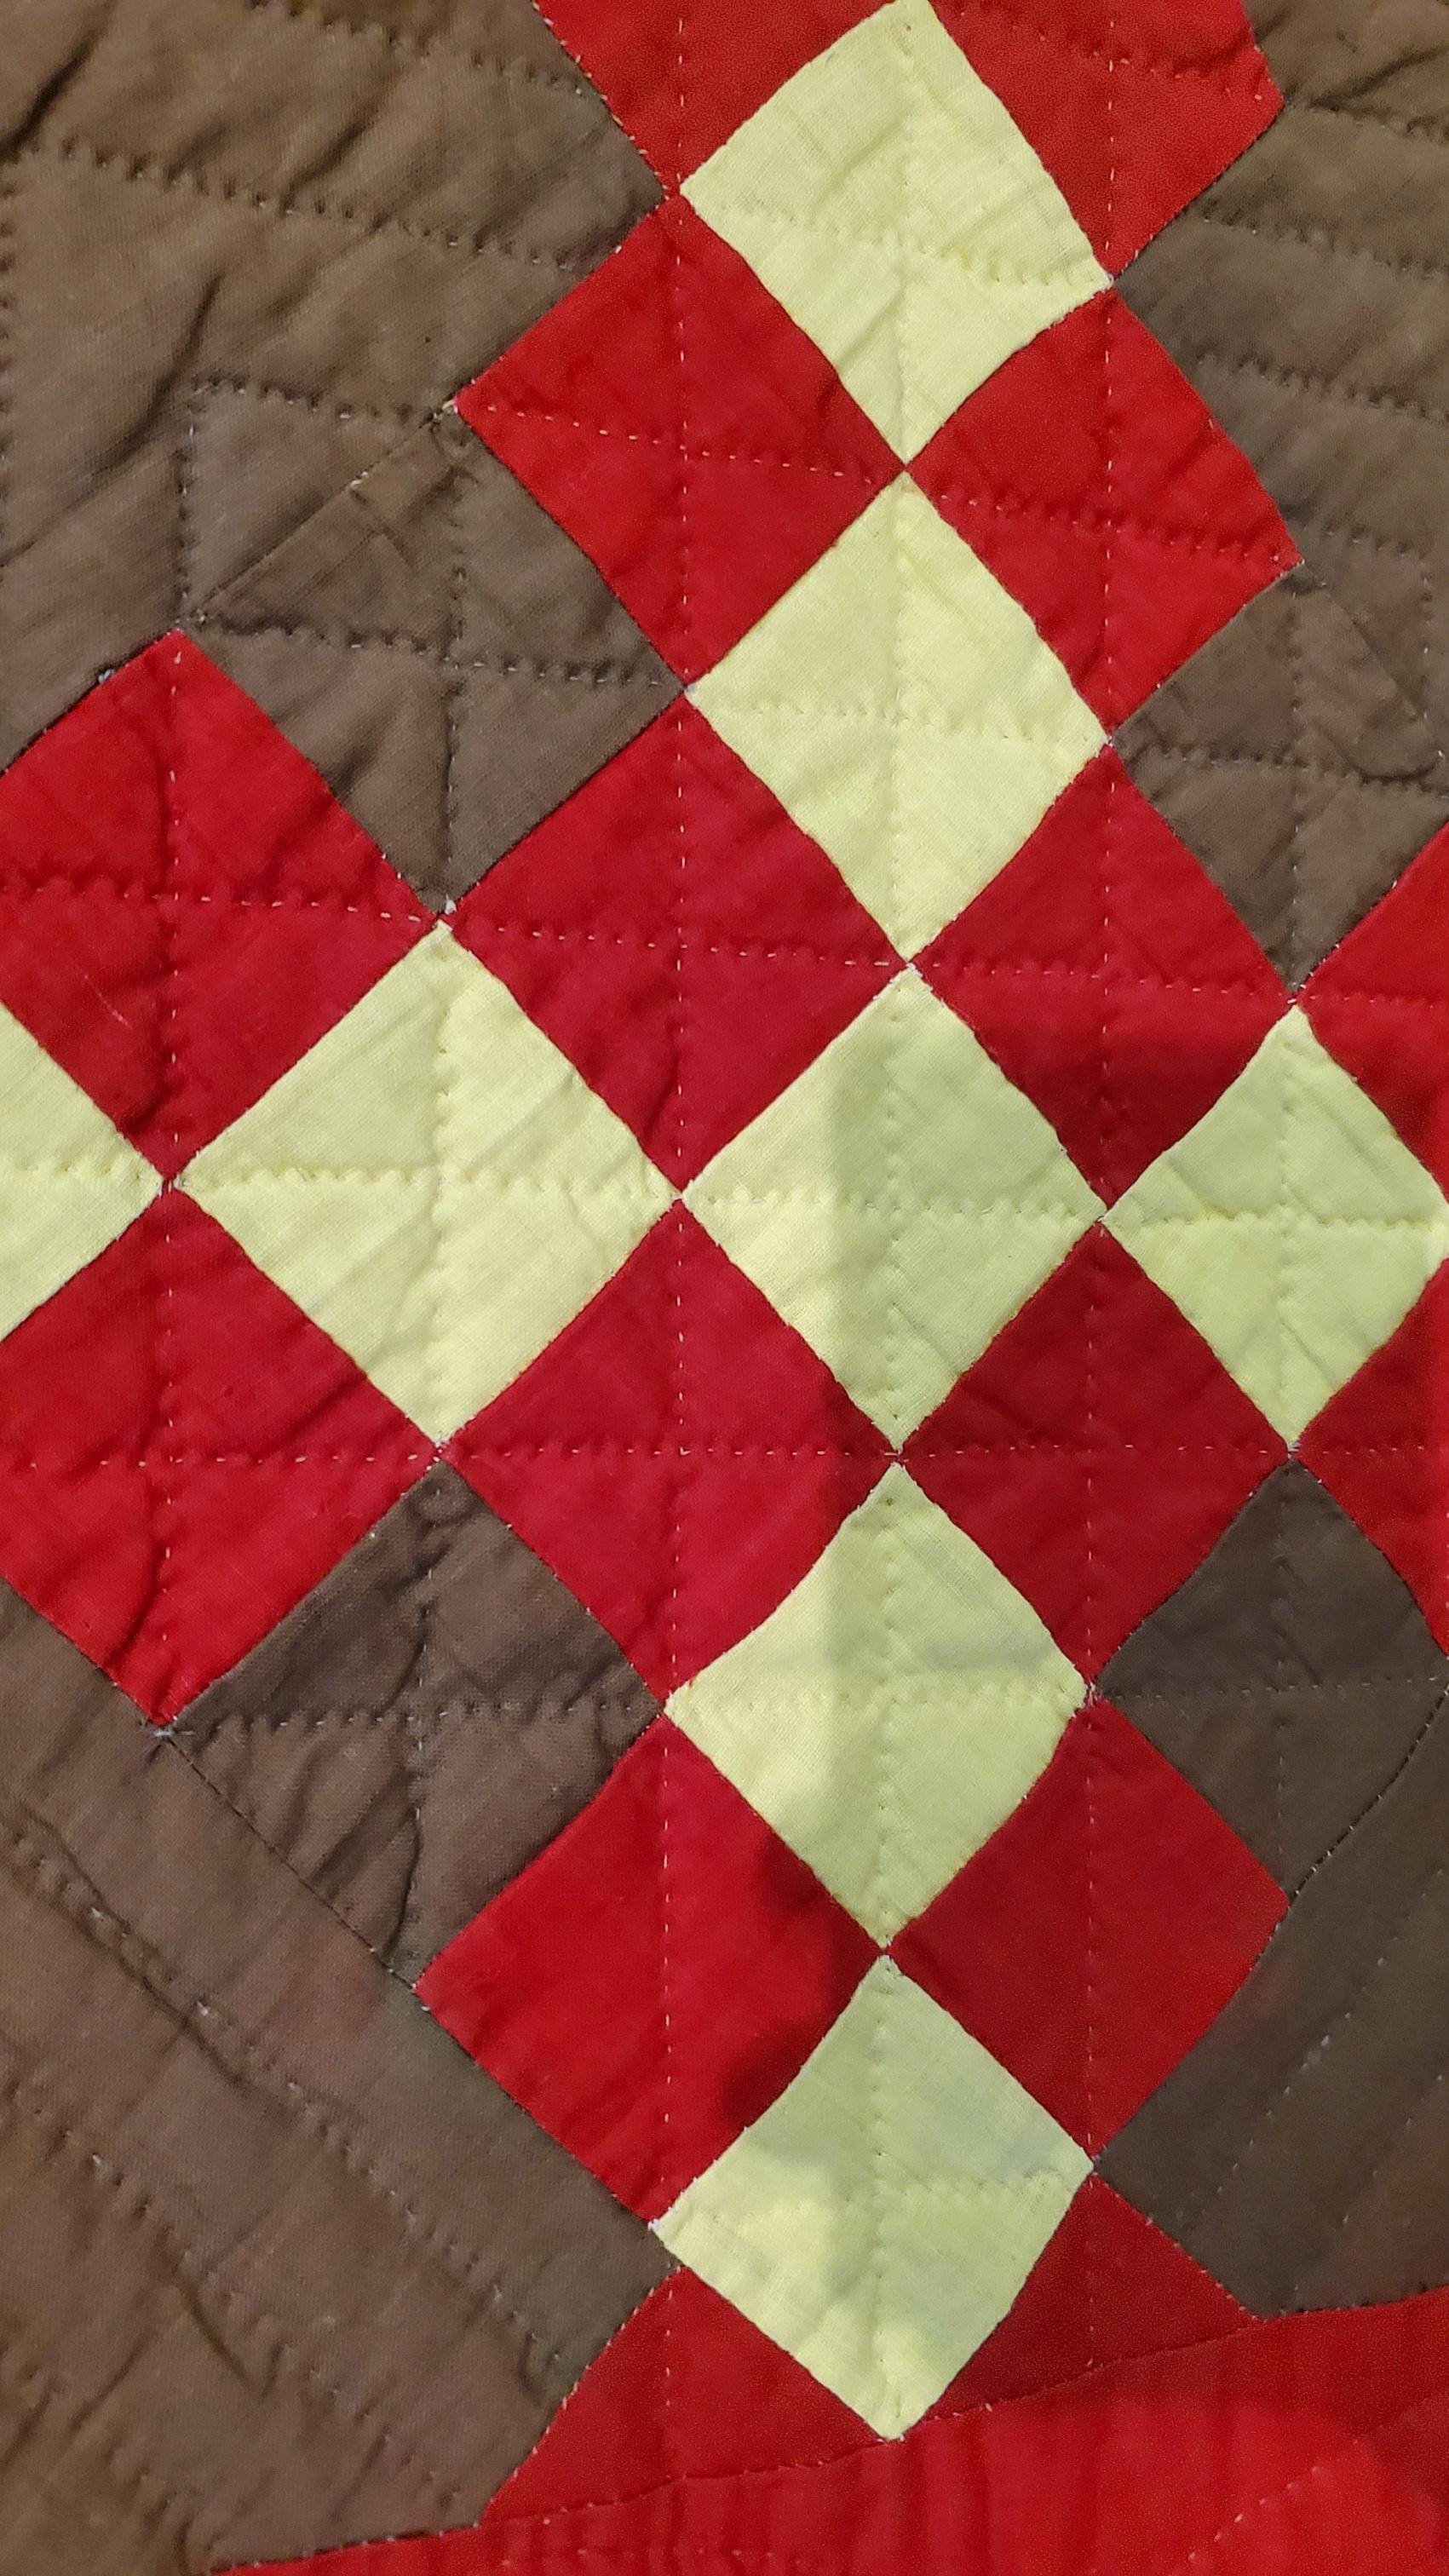 Hand-Crafted 19thc Triple Irish Chain Quilt from Pennsylvania